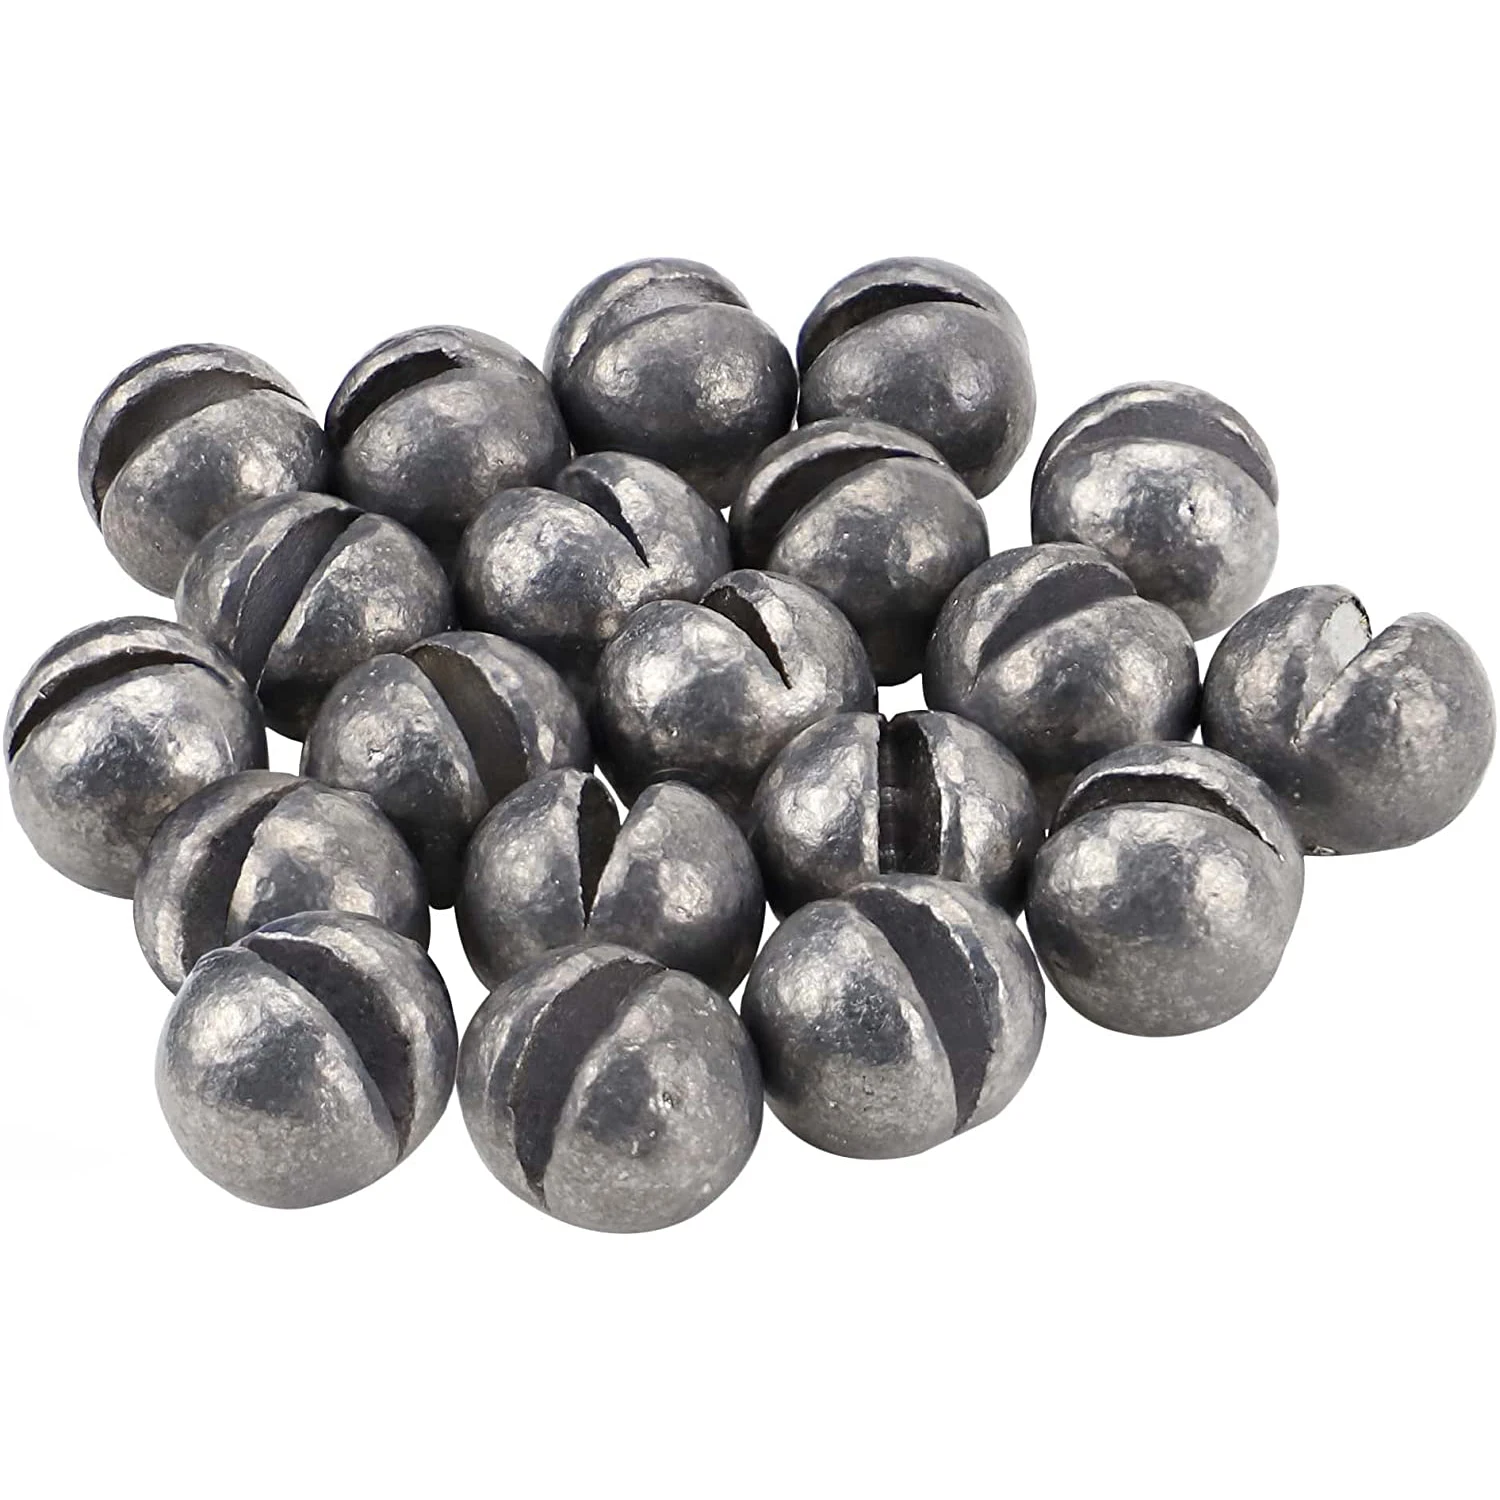 Fishing Weights Lead Round Ball Sinkers Bulk, Saltwater Freshwater